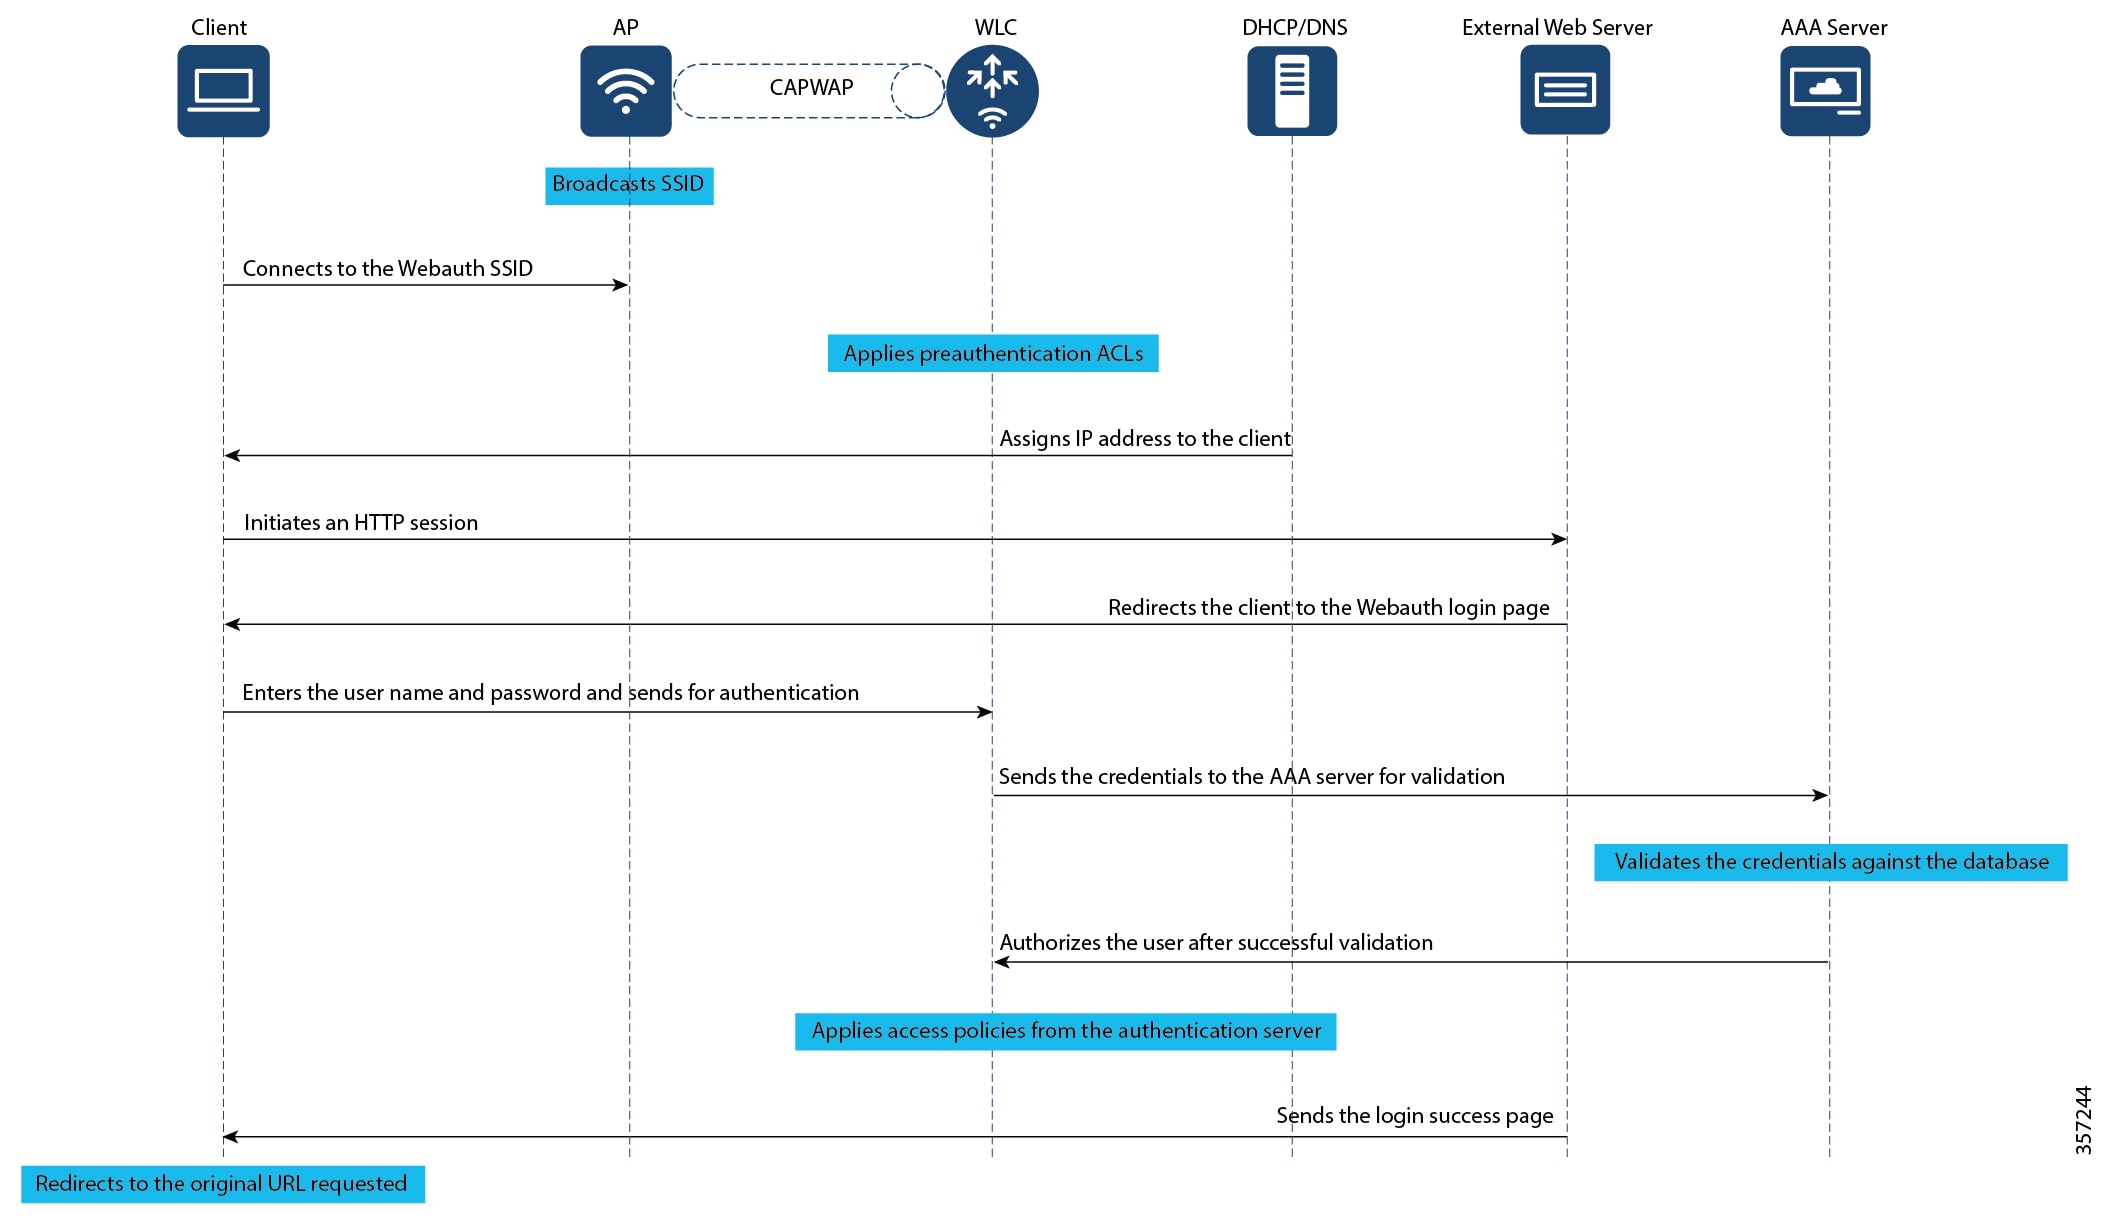 Workflow depicting all the tasks involved in local web authentication